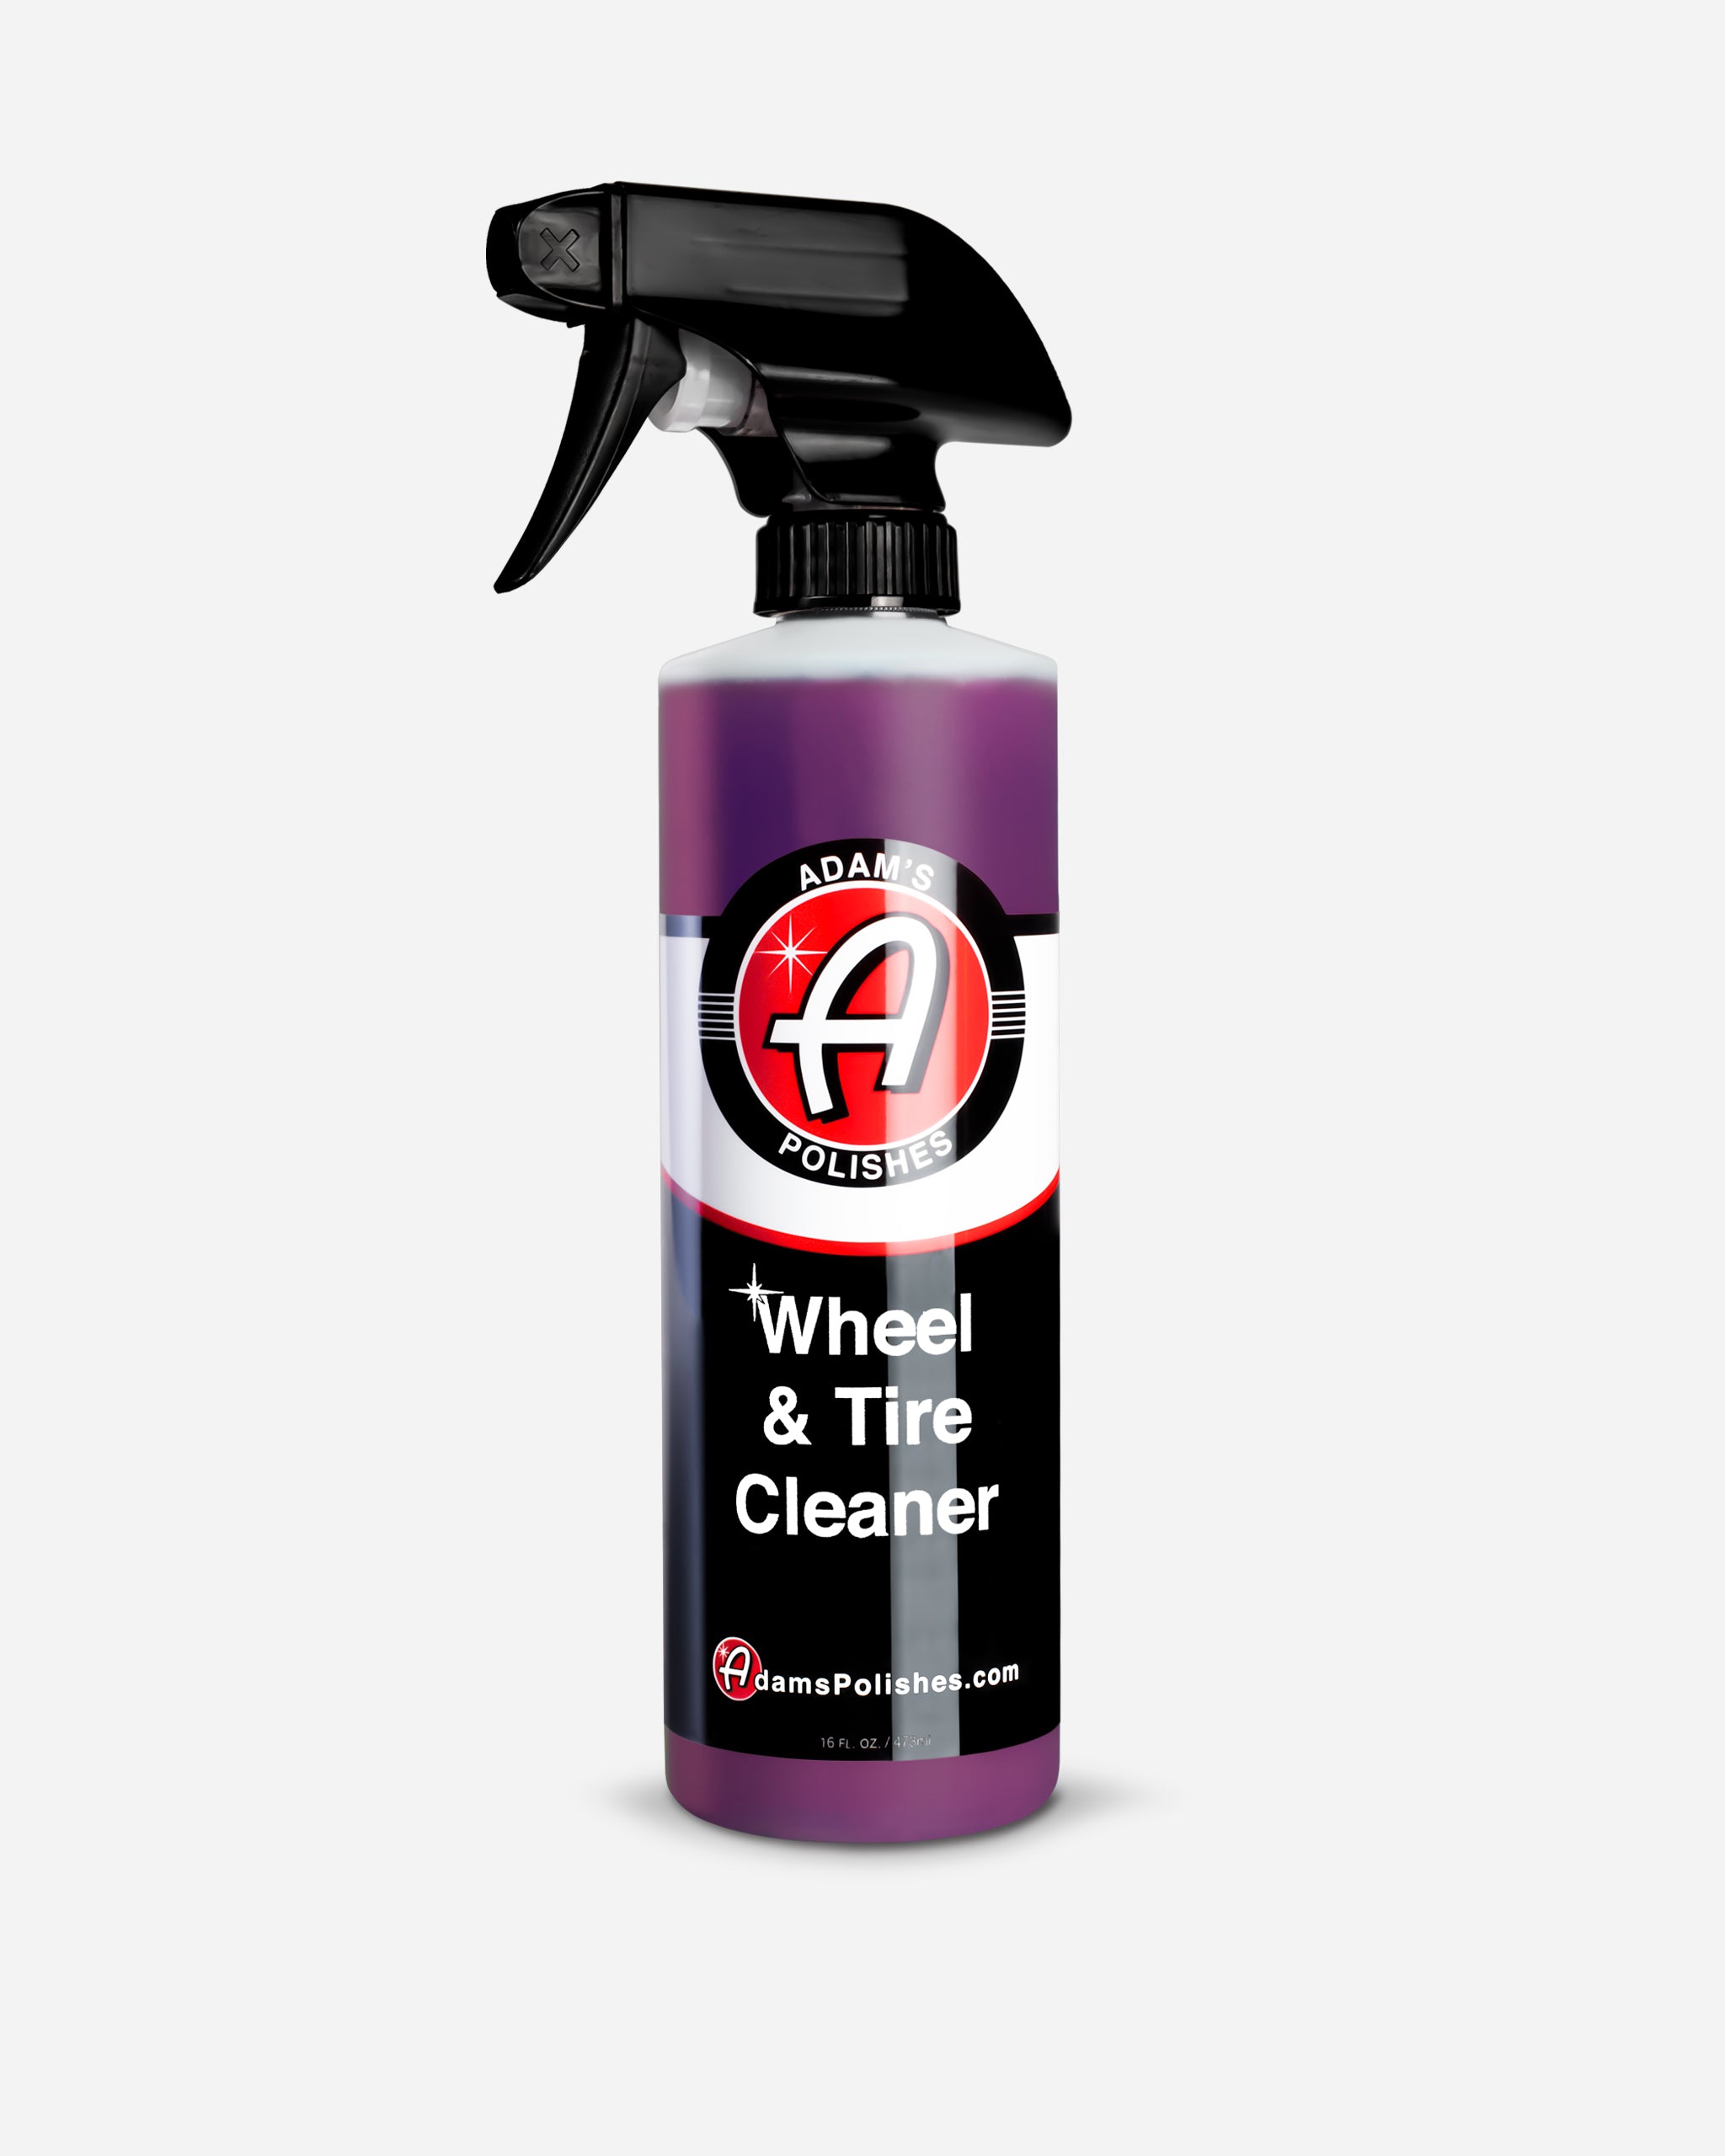 Tires & Wheels, Tire, Wheel and Rim Cleaners